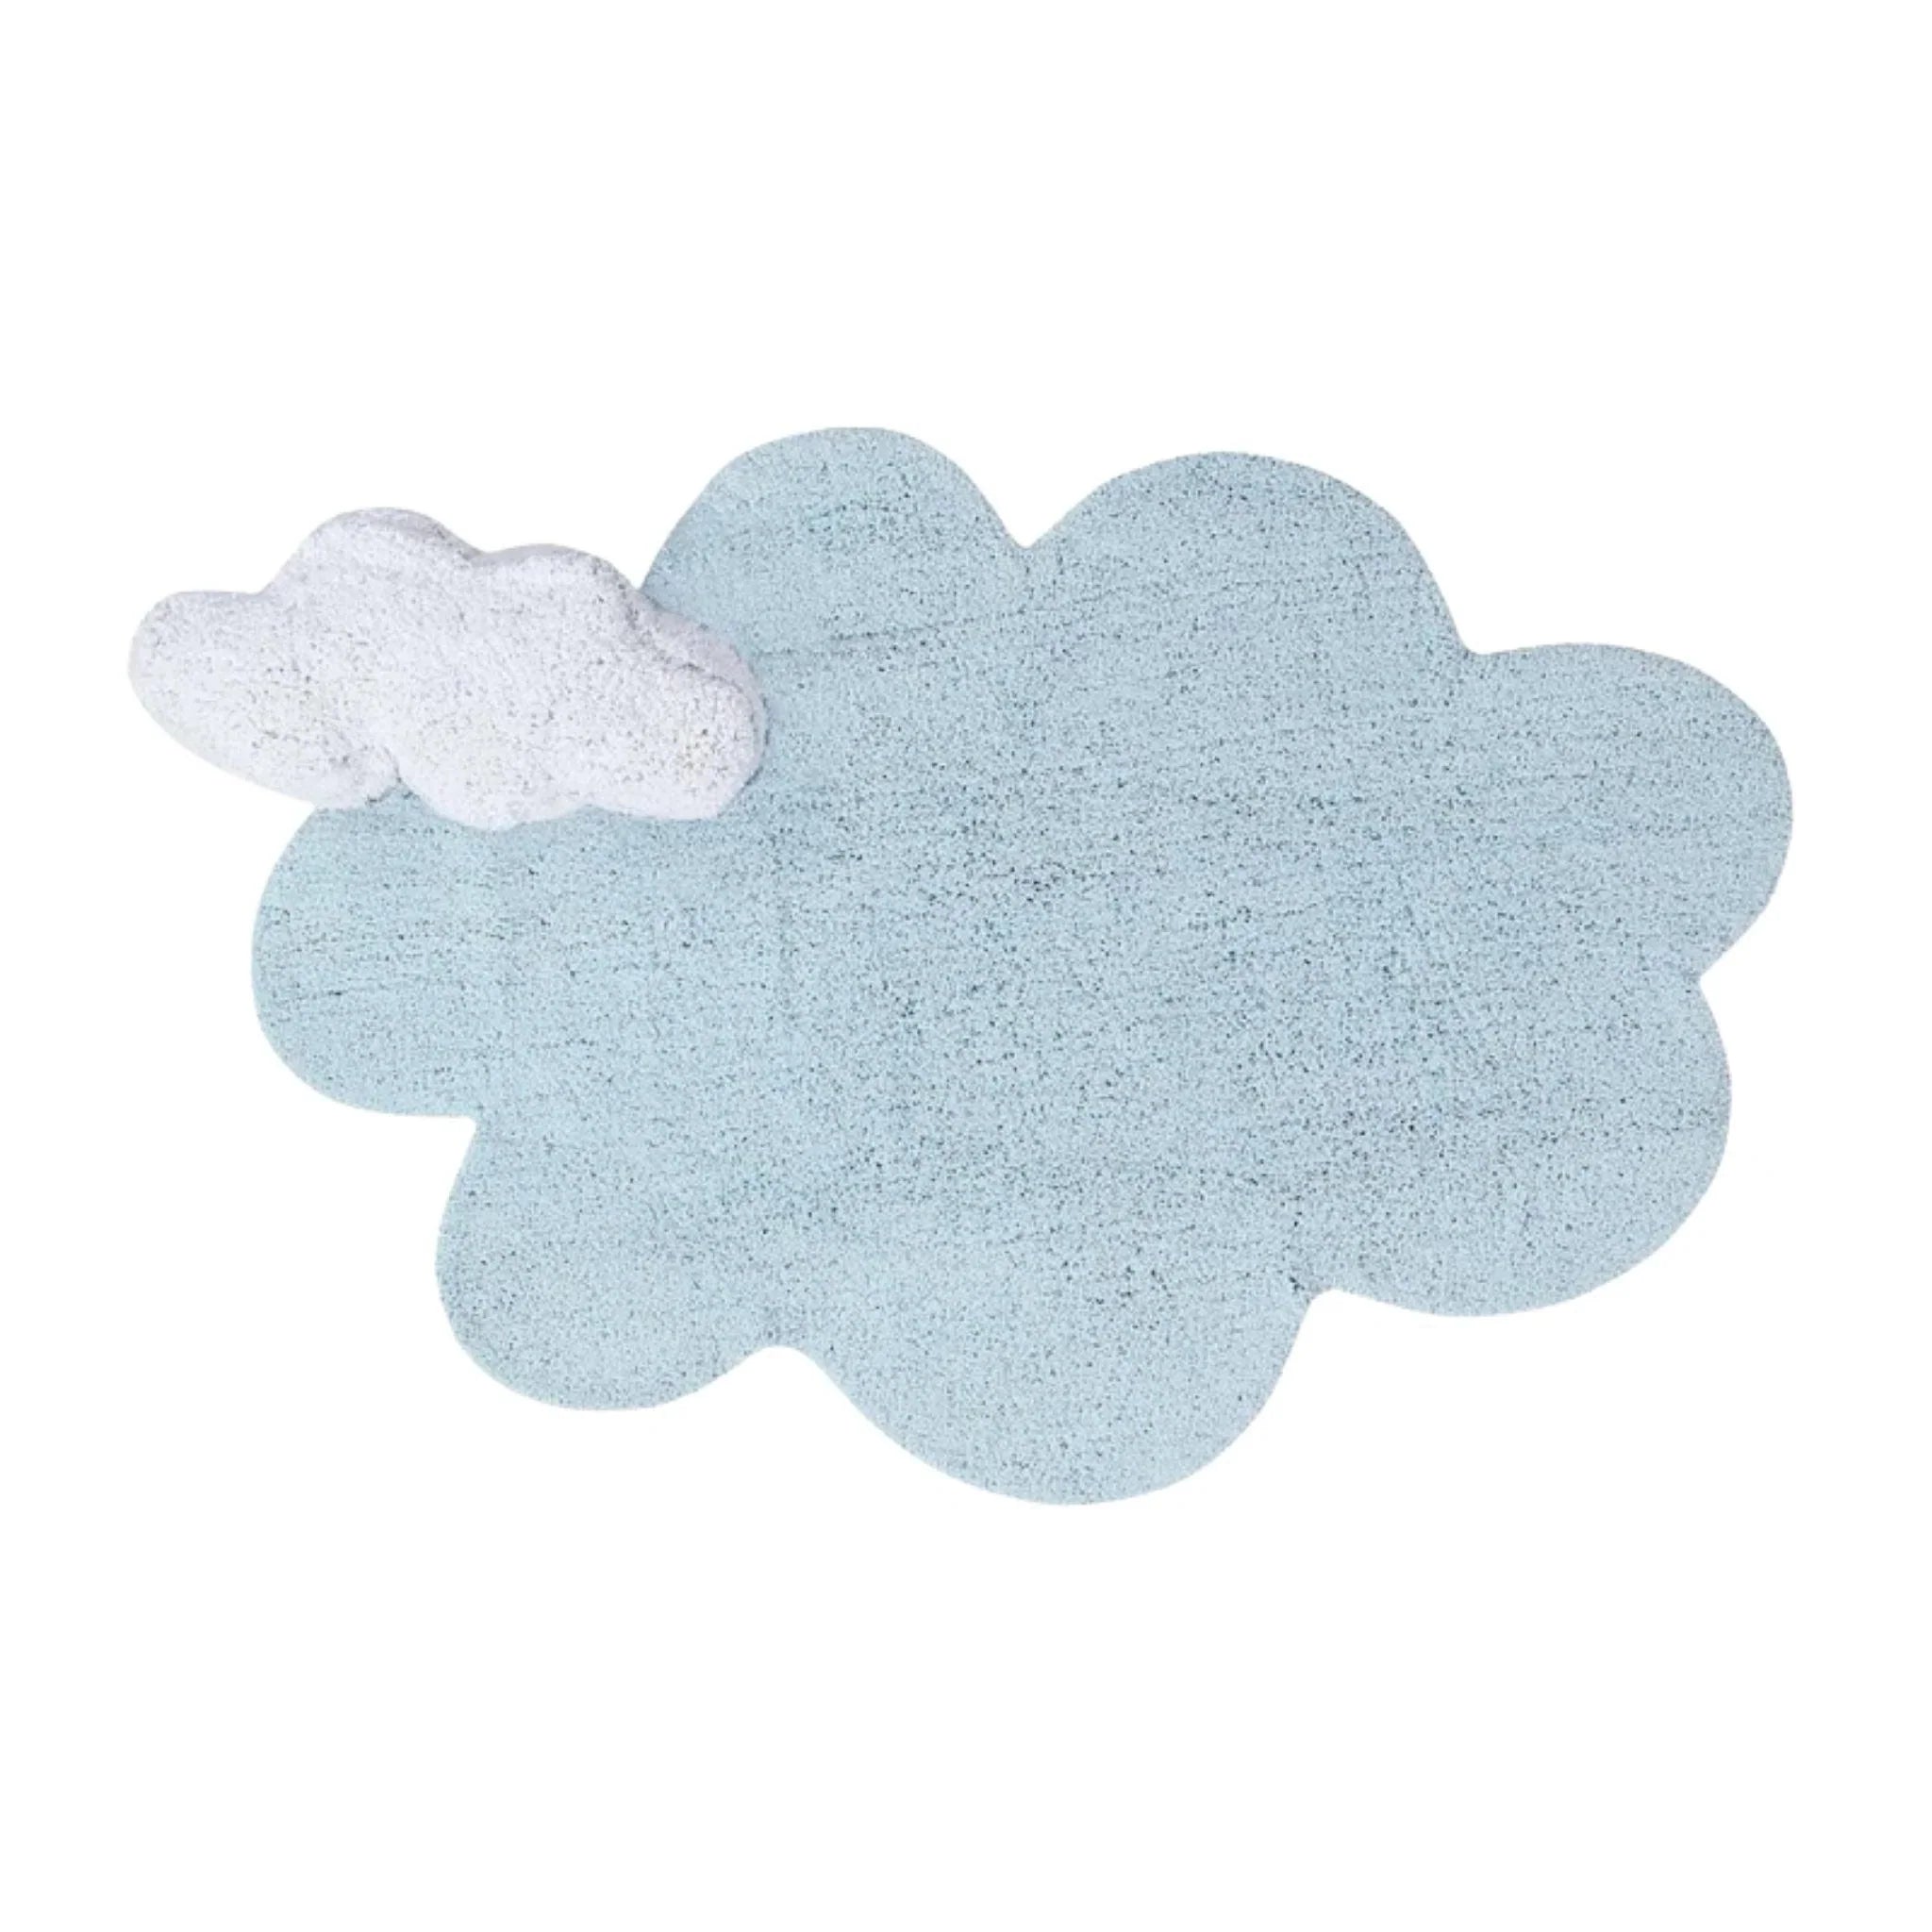 https://www.wellappointedhouse.com/cdn/shop/files/washable-blue-cloud-children-s-rug-with-built-in-cushion-little-loves-rugs-the-well-appointed-house-1_d3c9618c-2c13-4c8e-ae64-c84b6fdef0b9.webp?v=1691662719